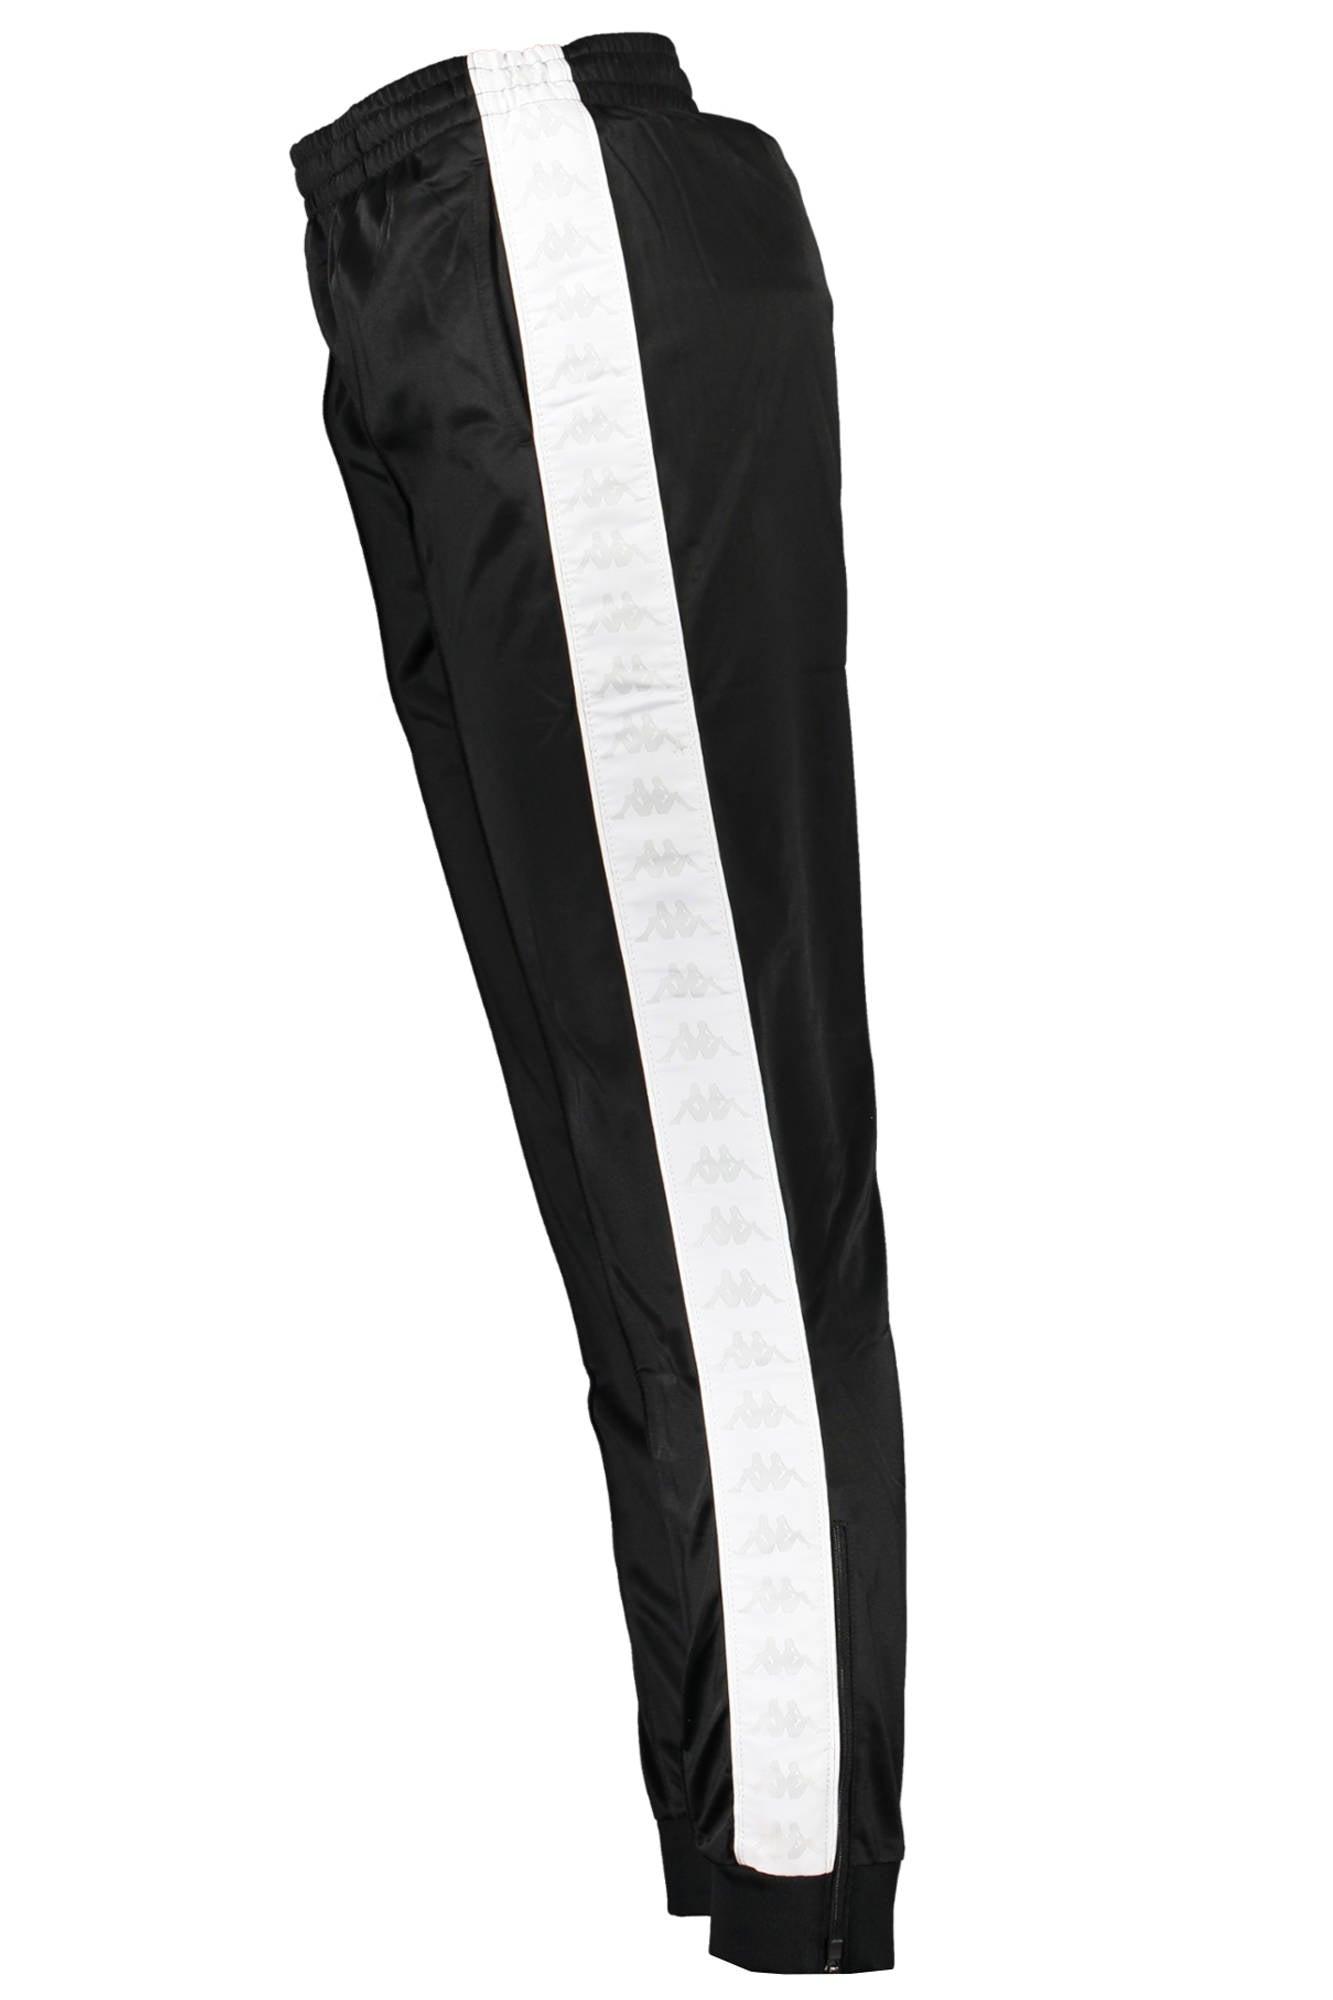 Kappa Polyester Jeans & Pant in Black for Men | Lyst